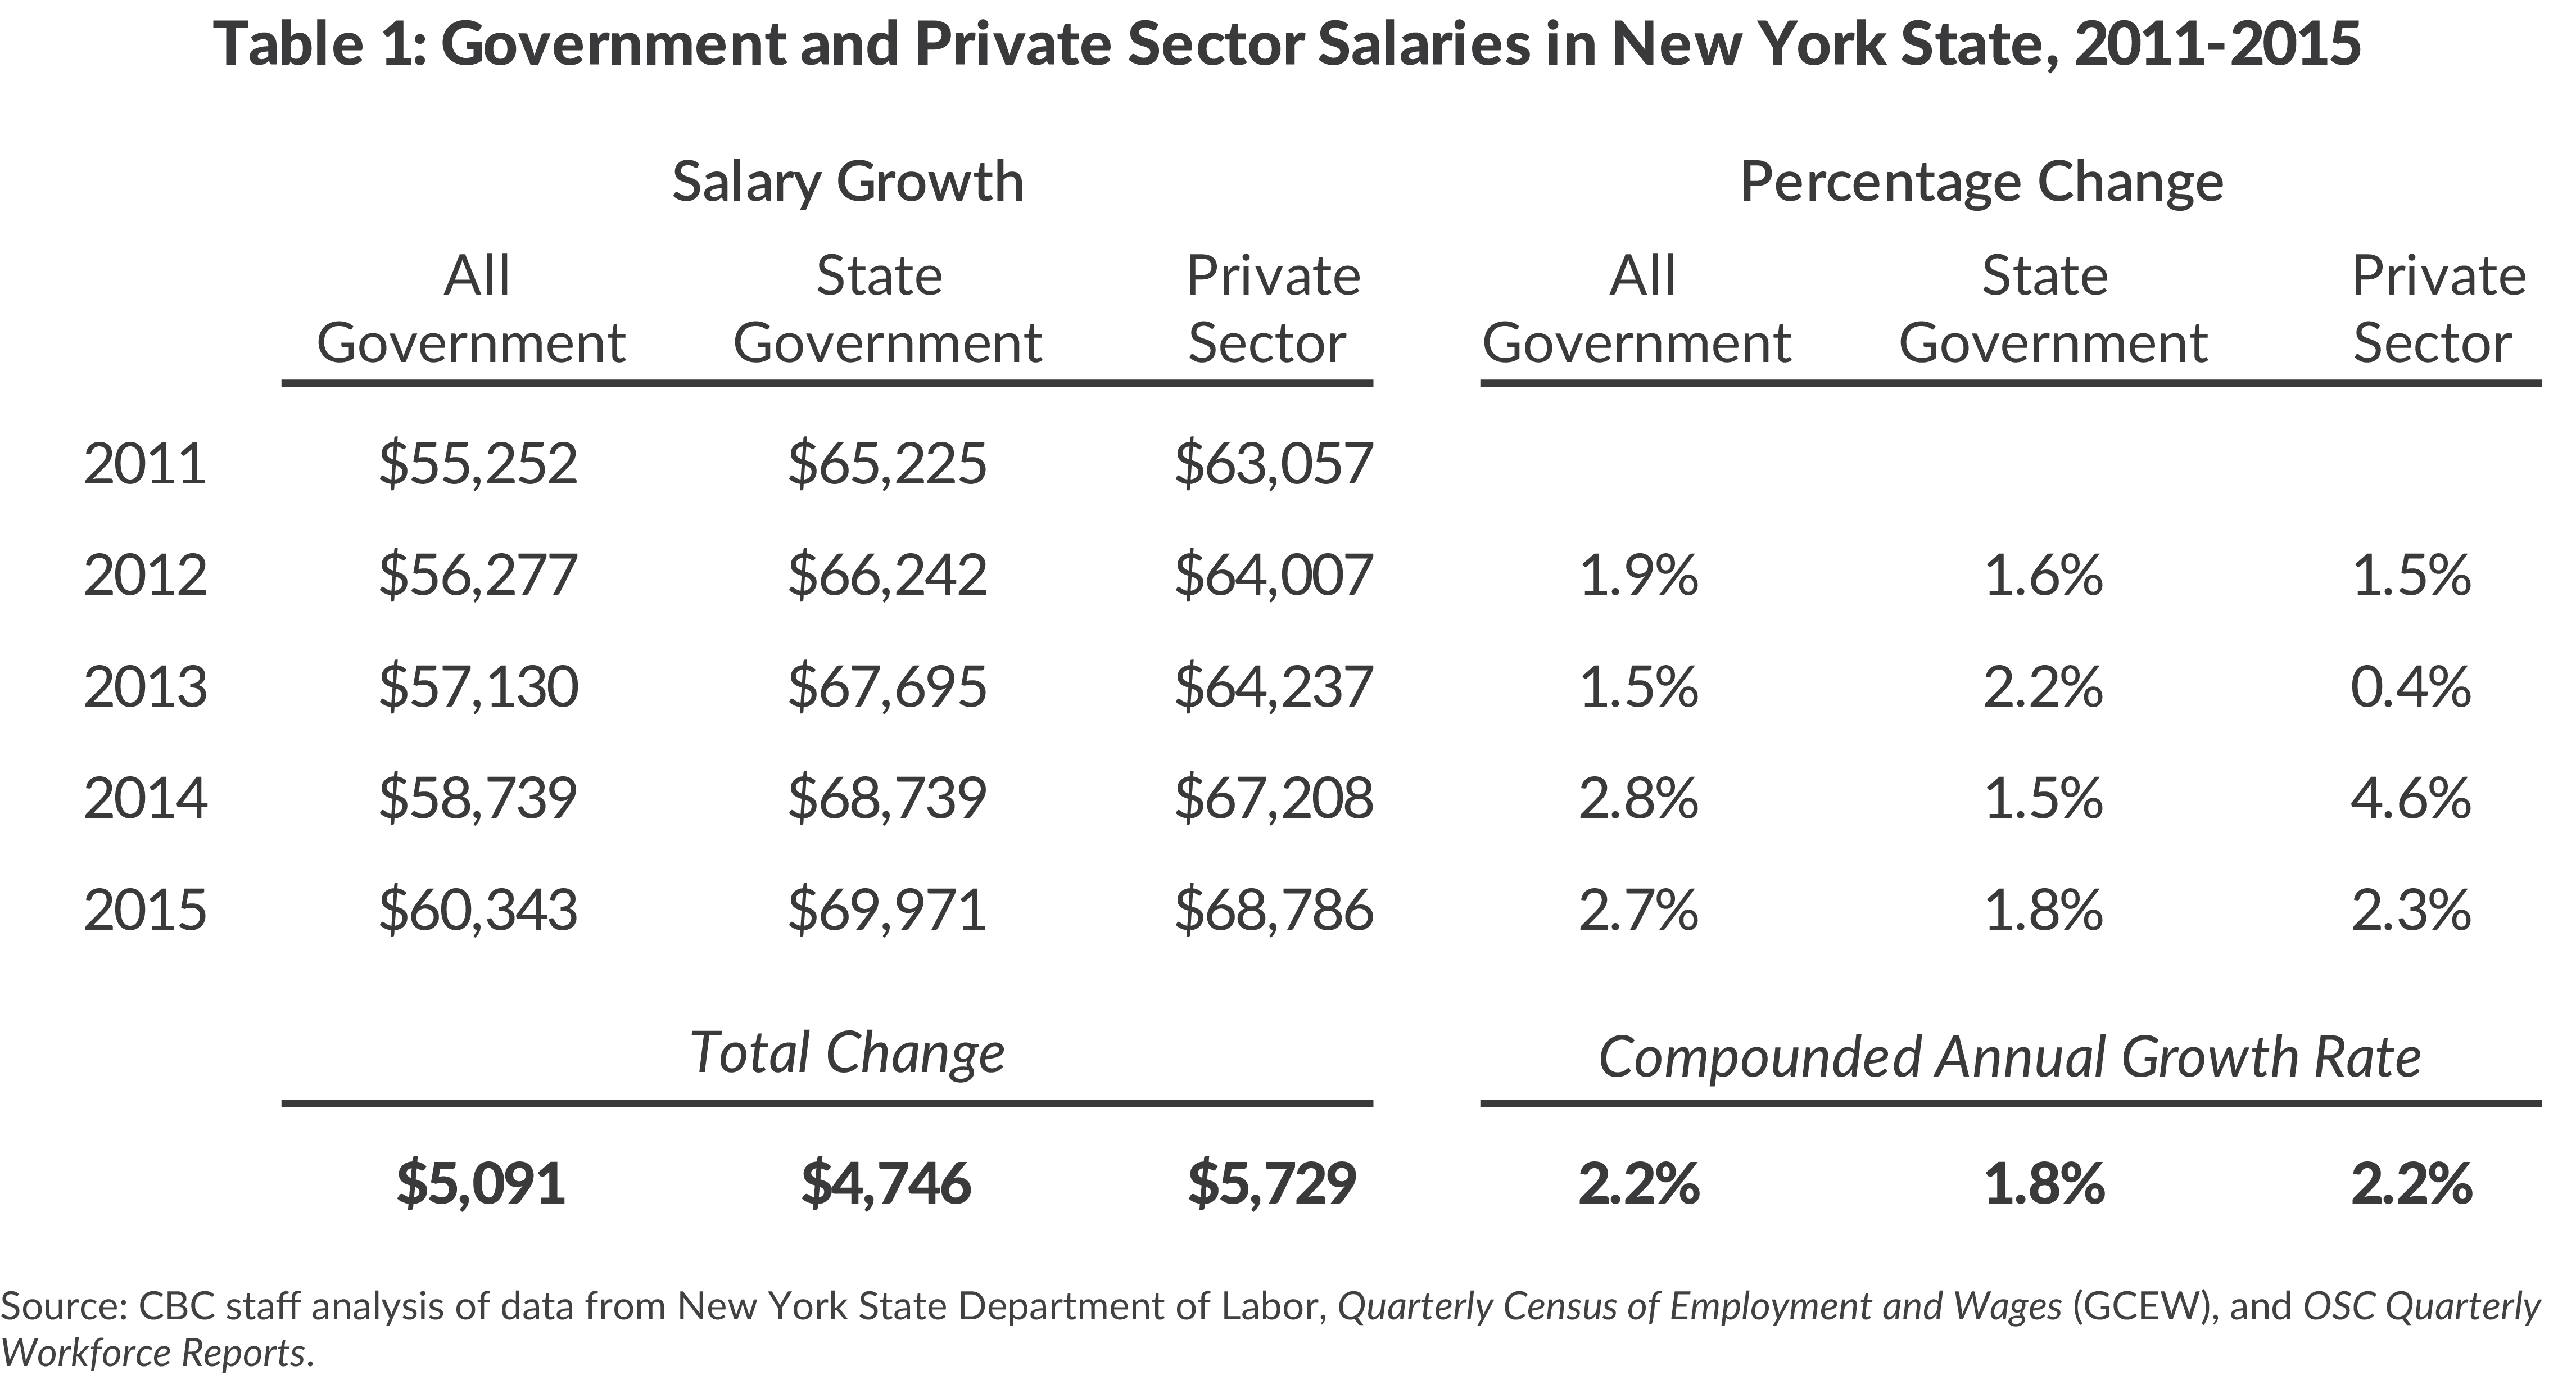 Table 1: Government and Private Sector Salaries in New York State, 2011-2015